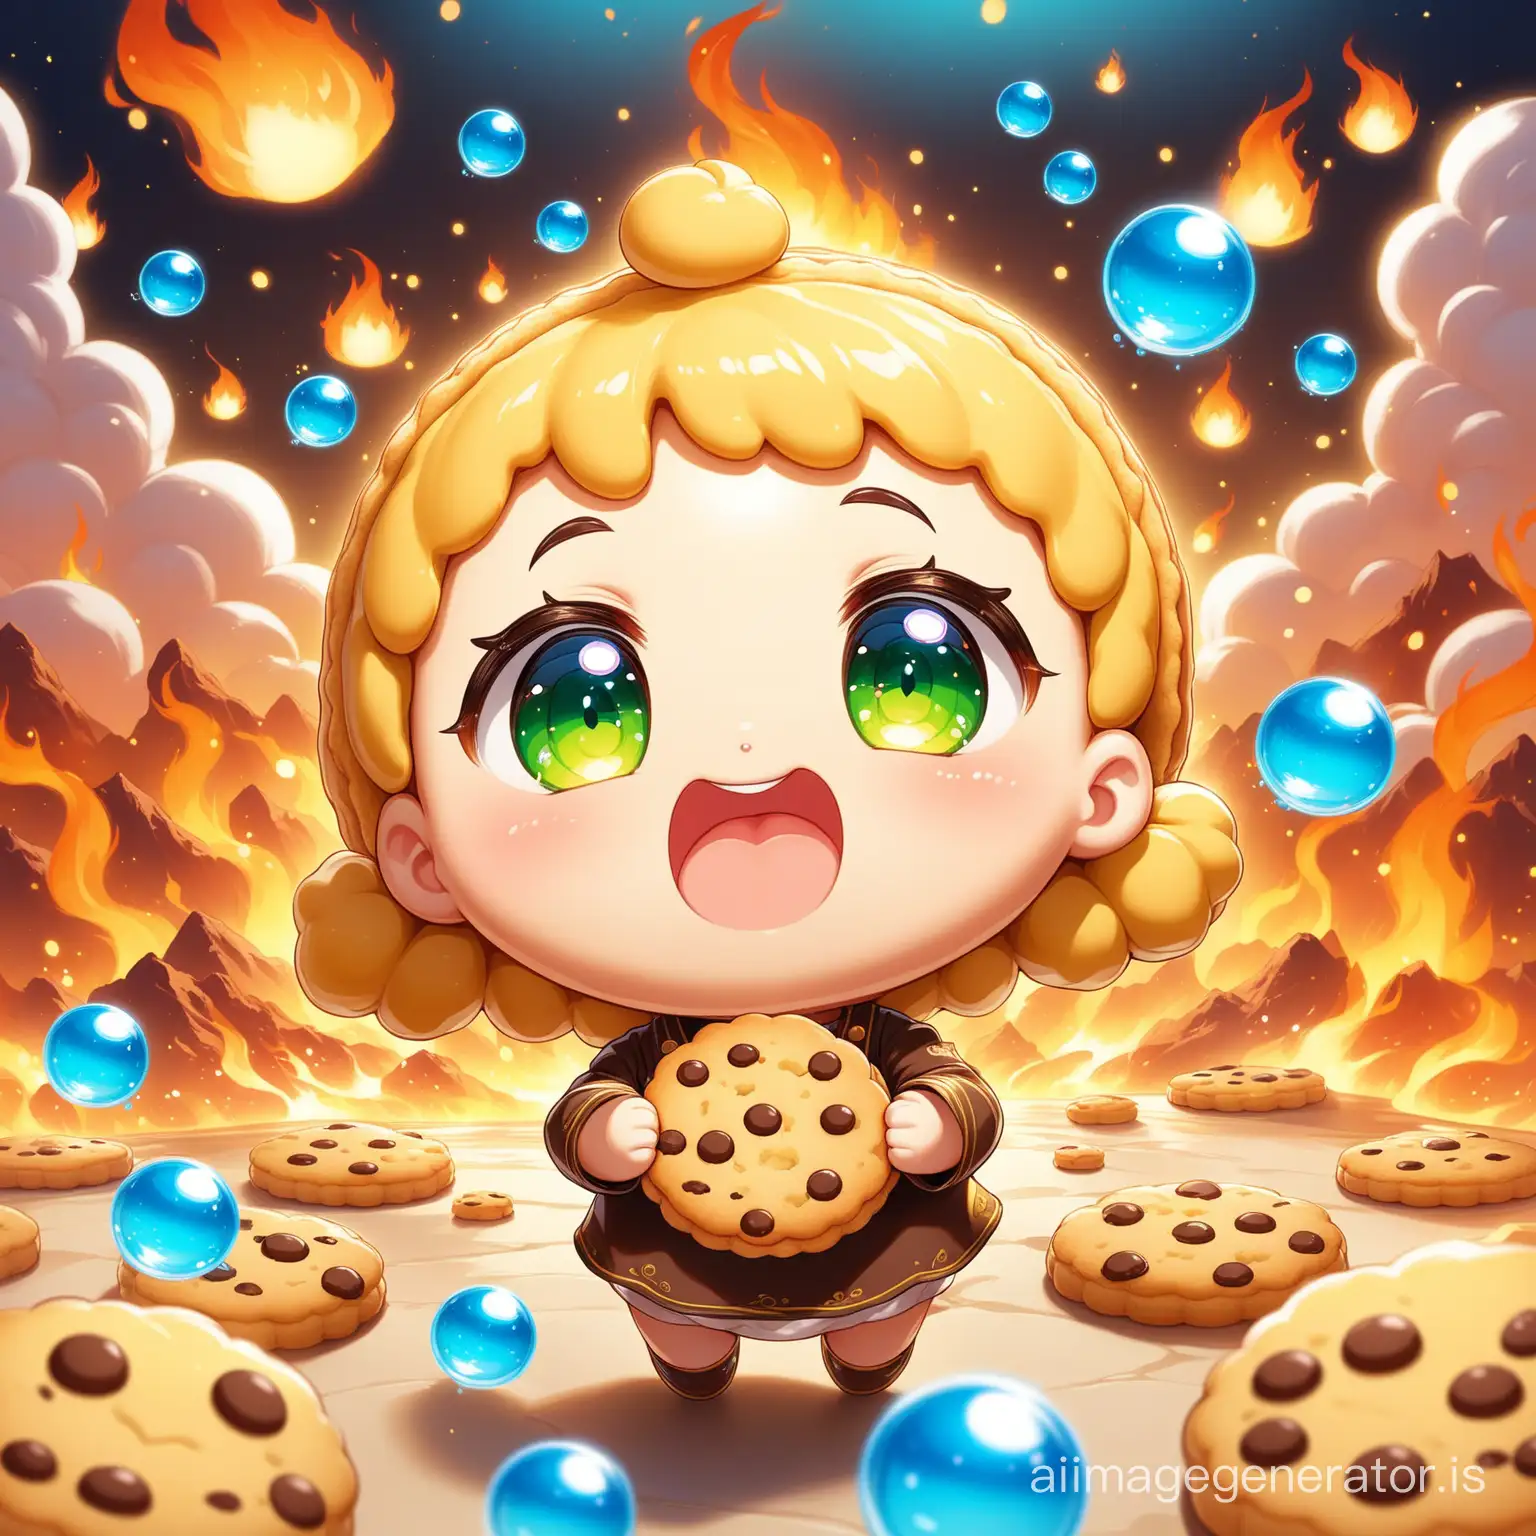 Adorable-Cookie-Walking-in-a-Whimsical-Wonderland-of-Fire-and-Magic